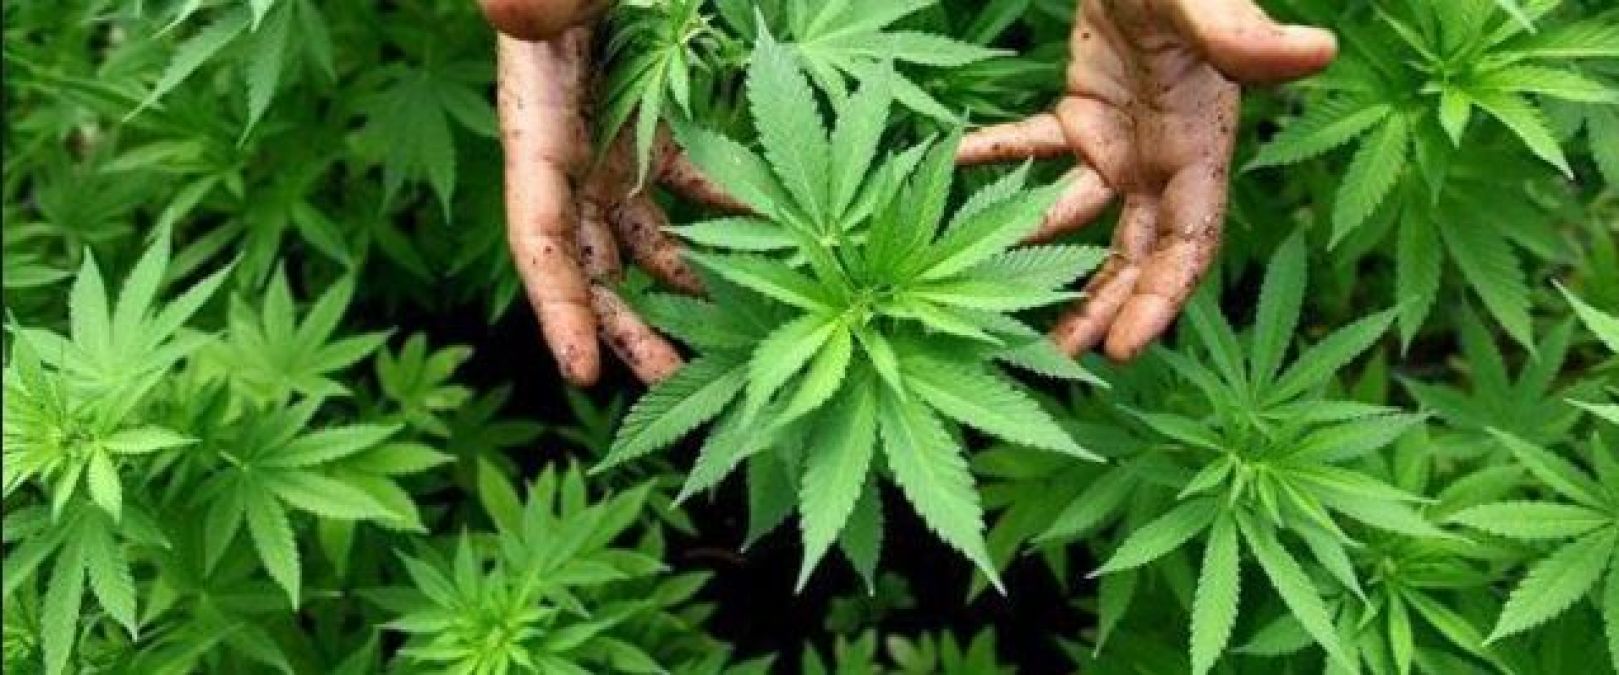 You will be surprised to know that cannabis has shocking benefits